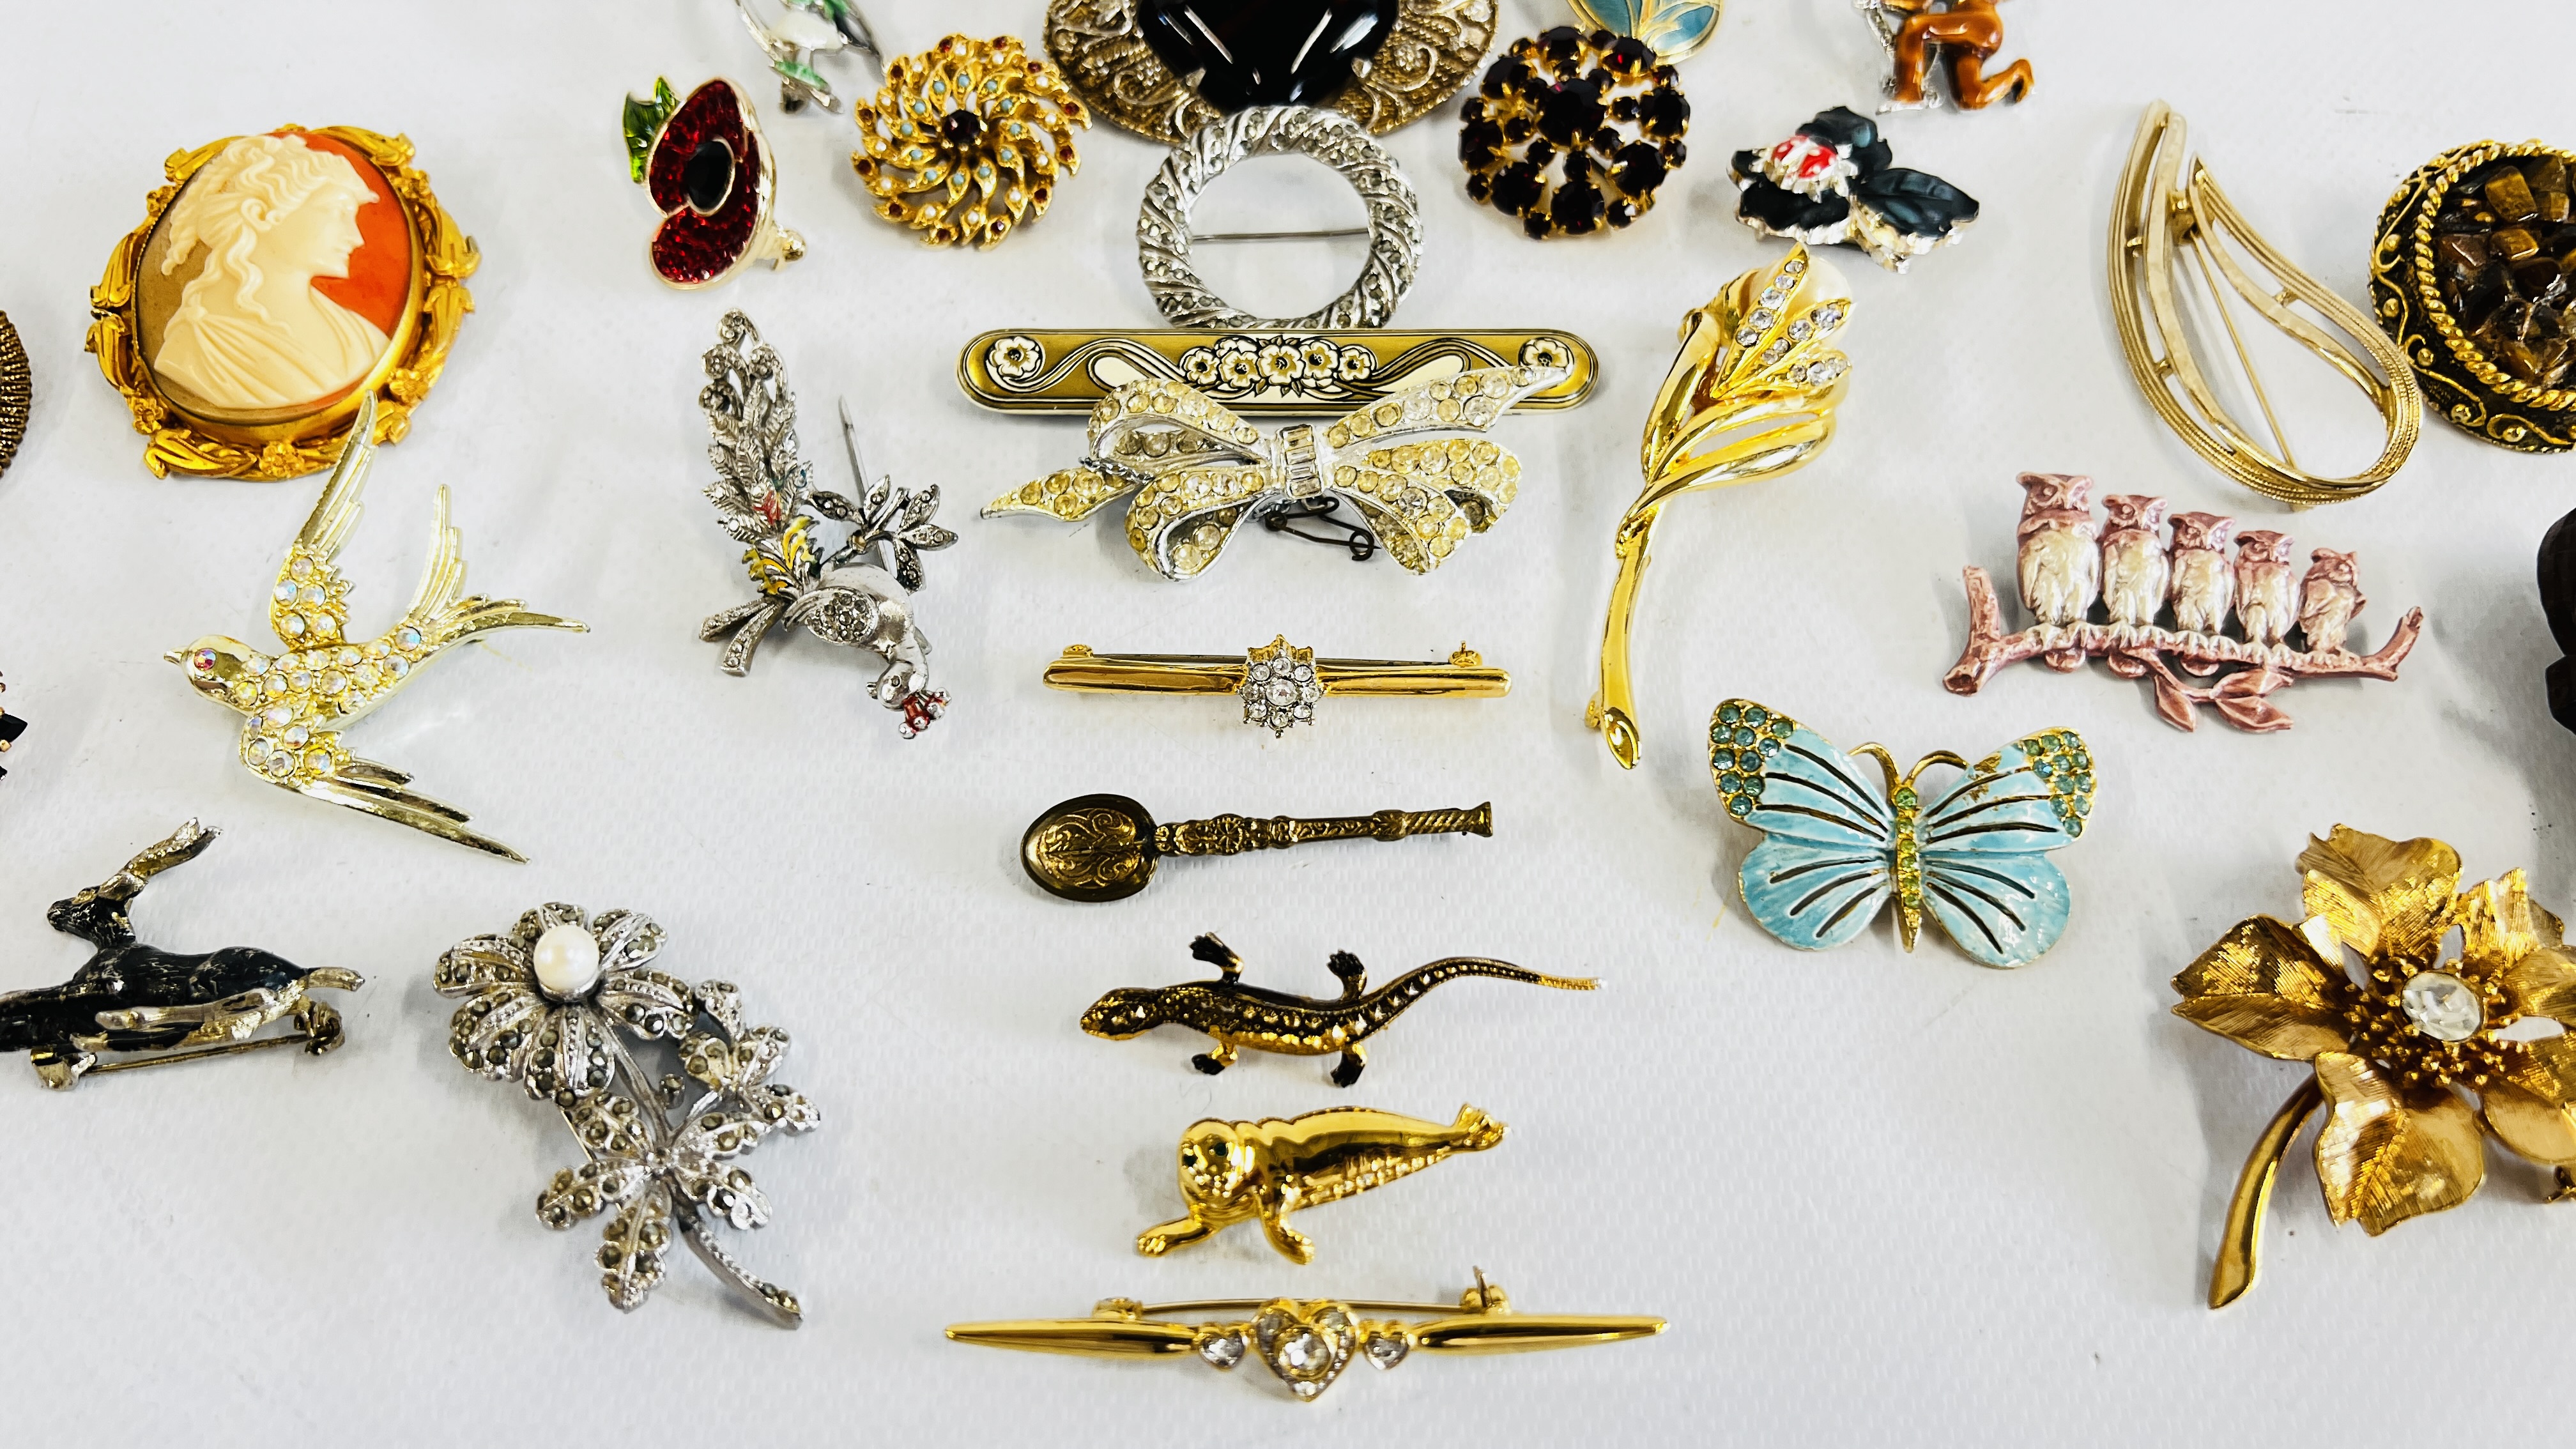 33 ASSORTED VINTAGE COSTUME BROOCHES INCLUDING ANIMALS, OWLS, TIGERS EYE, BIRDS ETC. - Image 4 of 5